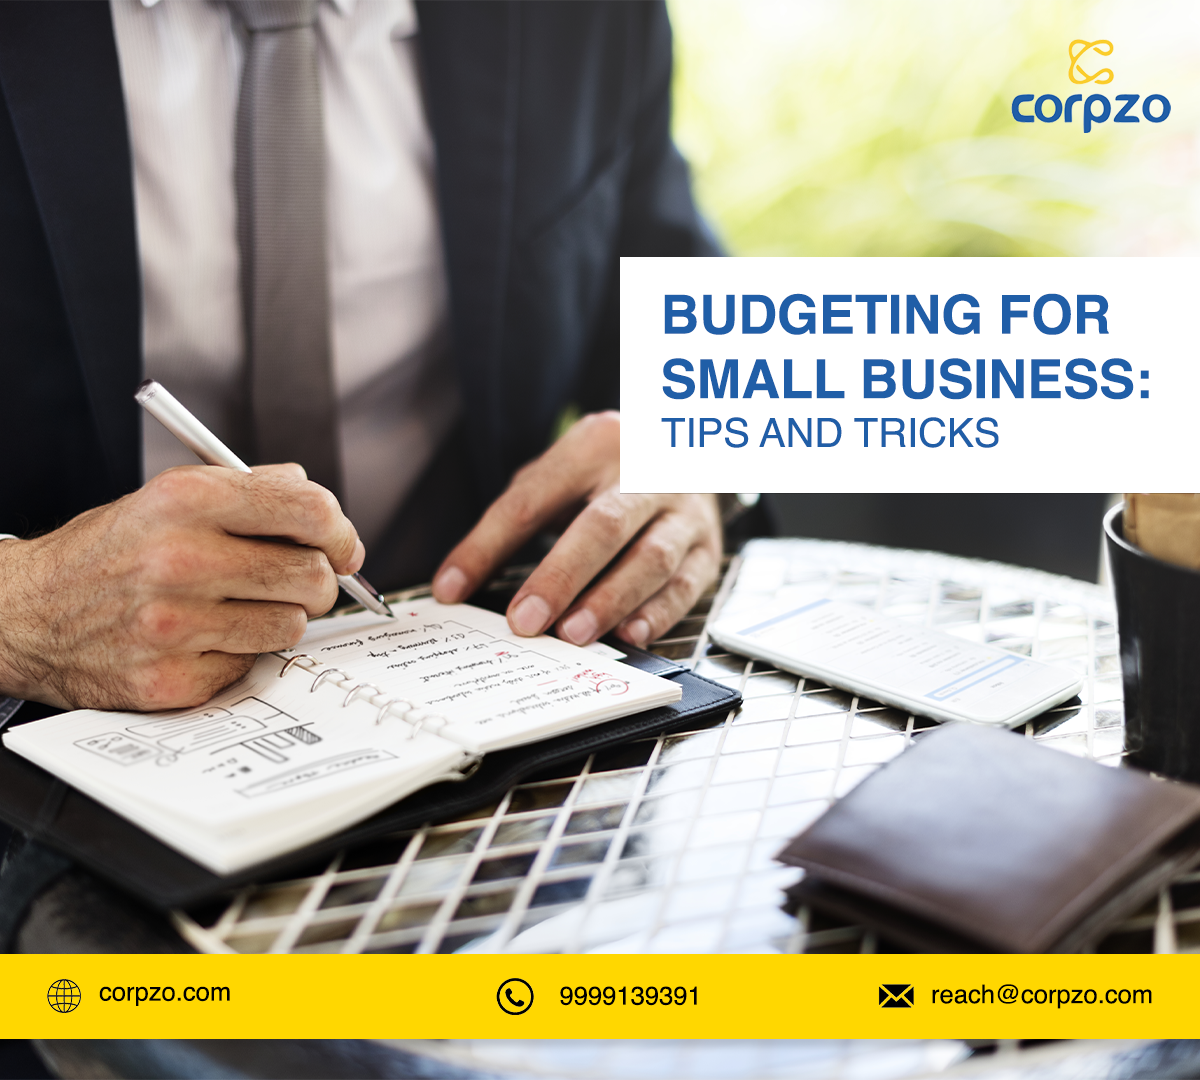 Budgeting for Small Business: Tips and Tricks